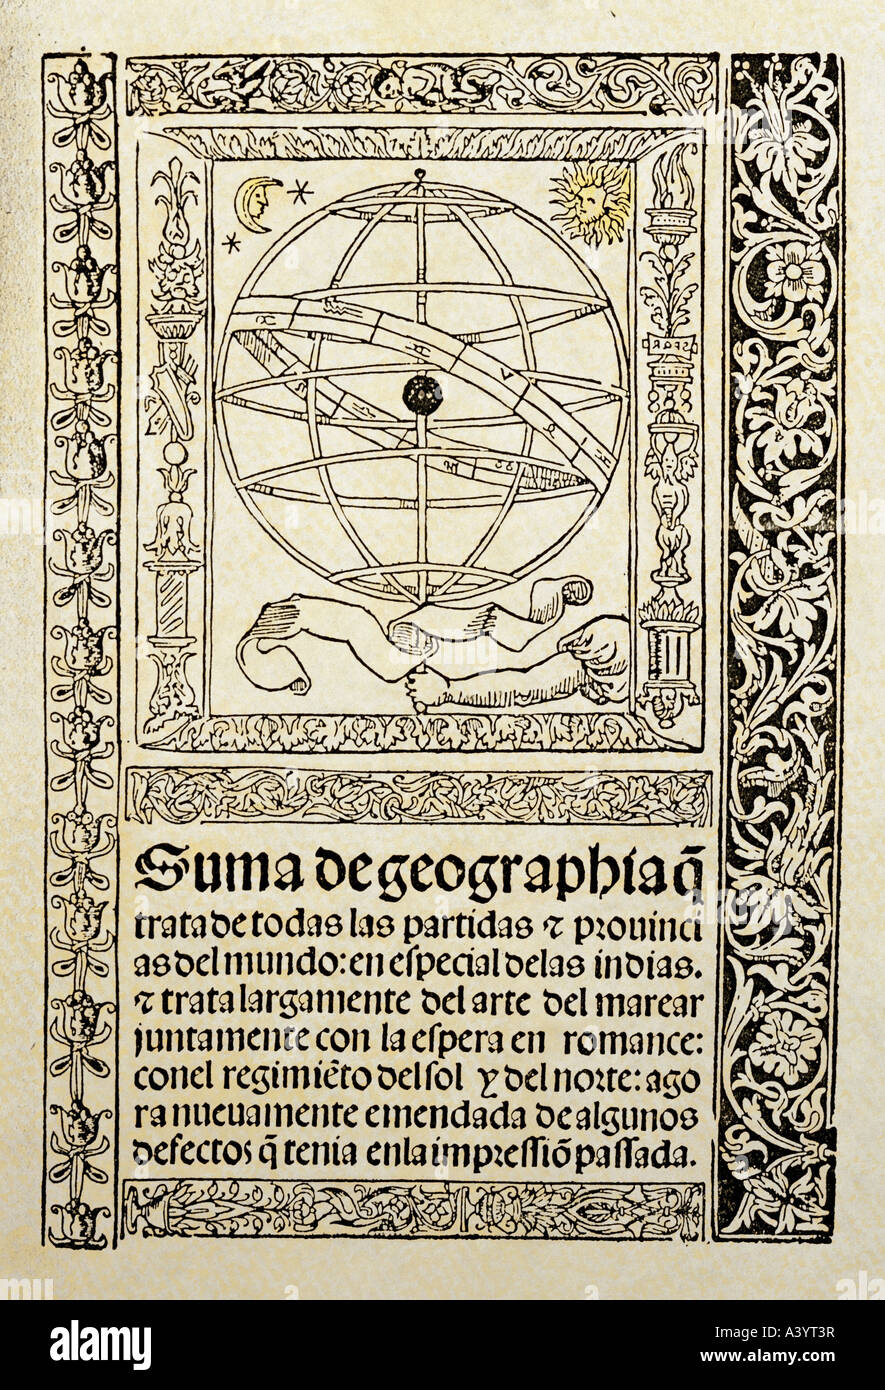 astronomy, measuring instruments, armillary sphere with zodiac, woodcut, from 'Suma de geographia', by Enciso, printed by Jakob Cromberger, Sevilla, first half 16th century, private collection, , Stock Photo